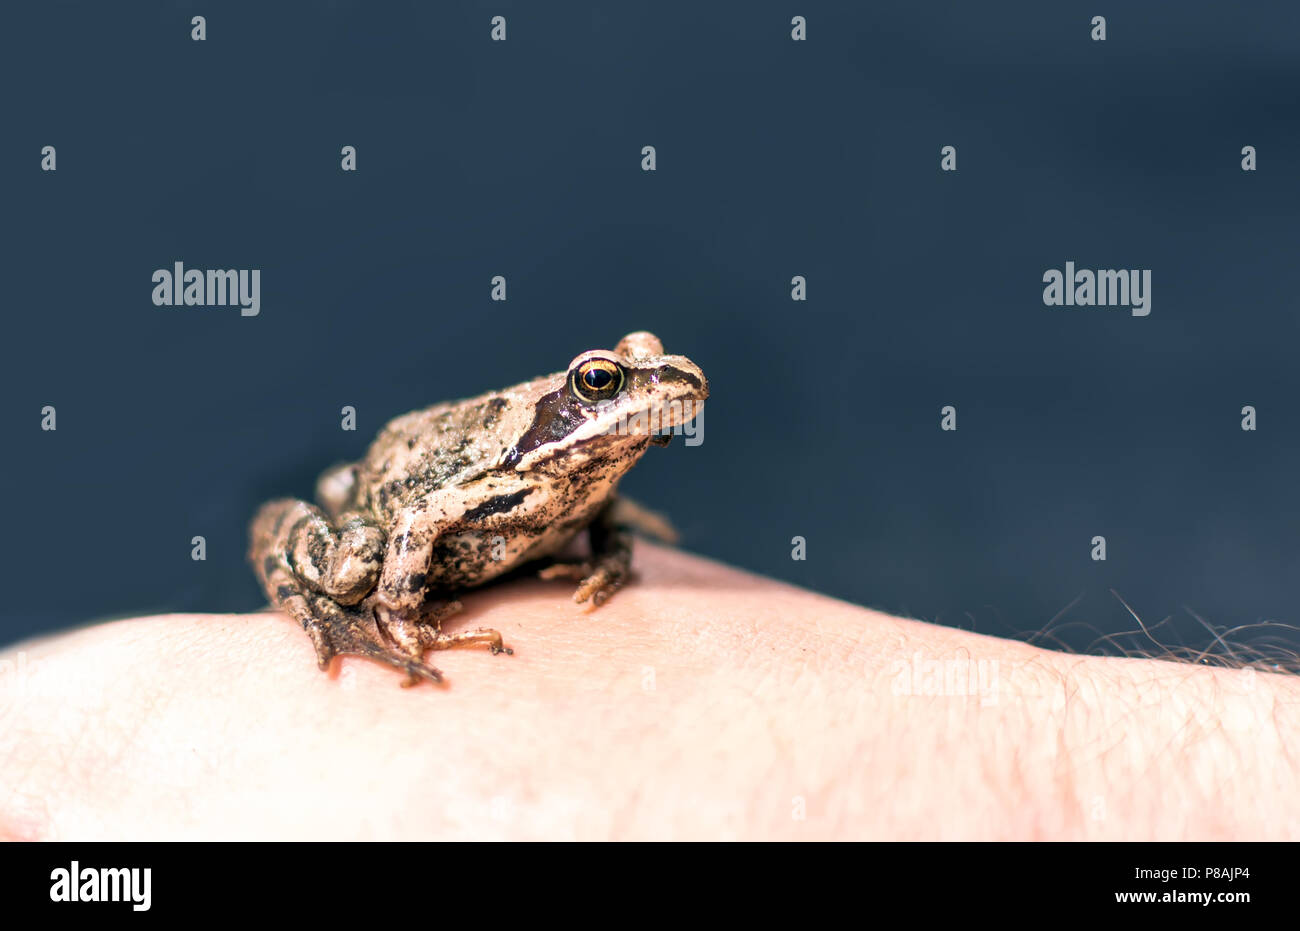 Slim, reddish-brown Moor frog (Rana arvalis) sitting on a man's hand. This semiaquatic amphibian is a member of the family Ranidae, or true frogs. Stock Photo